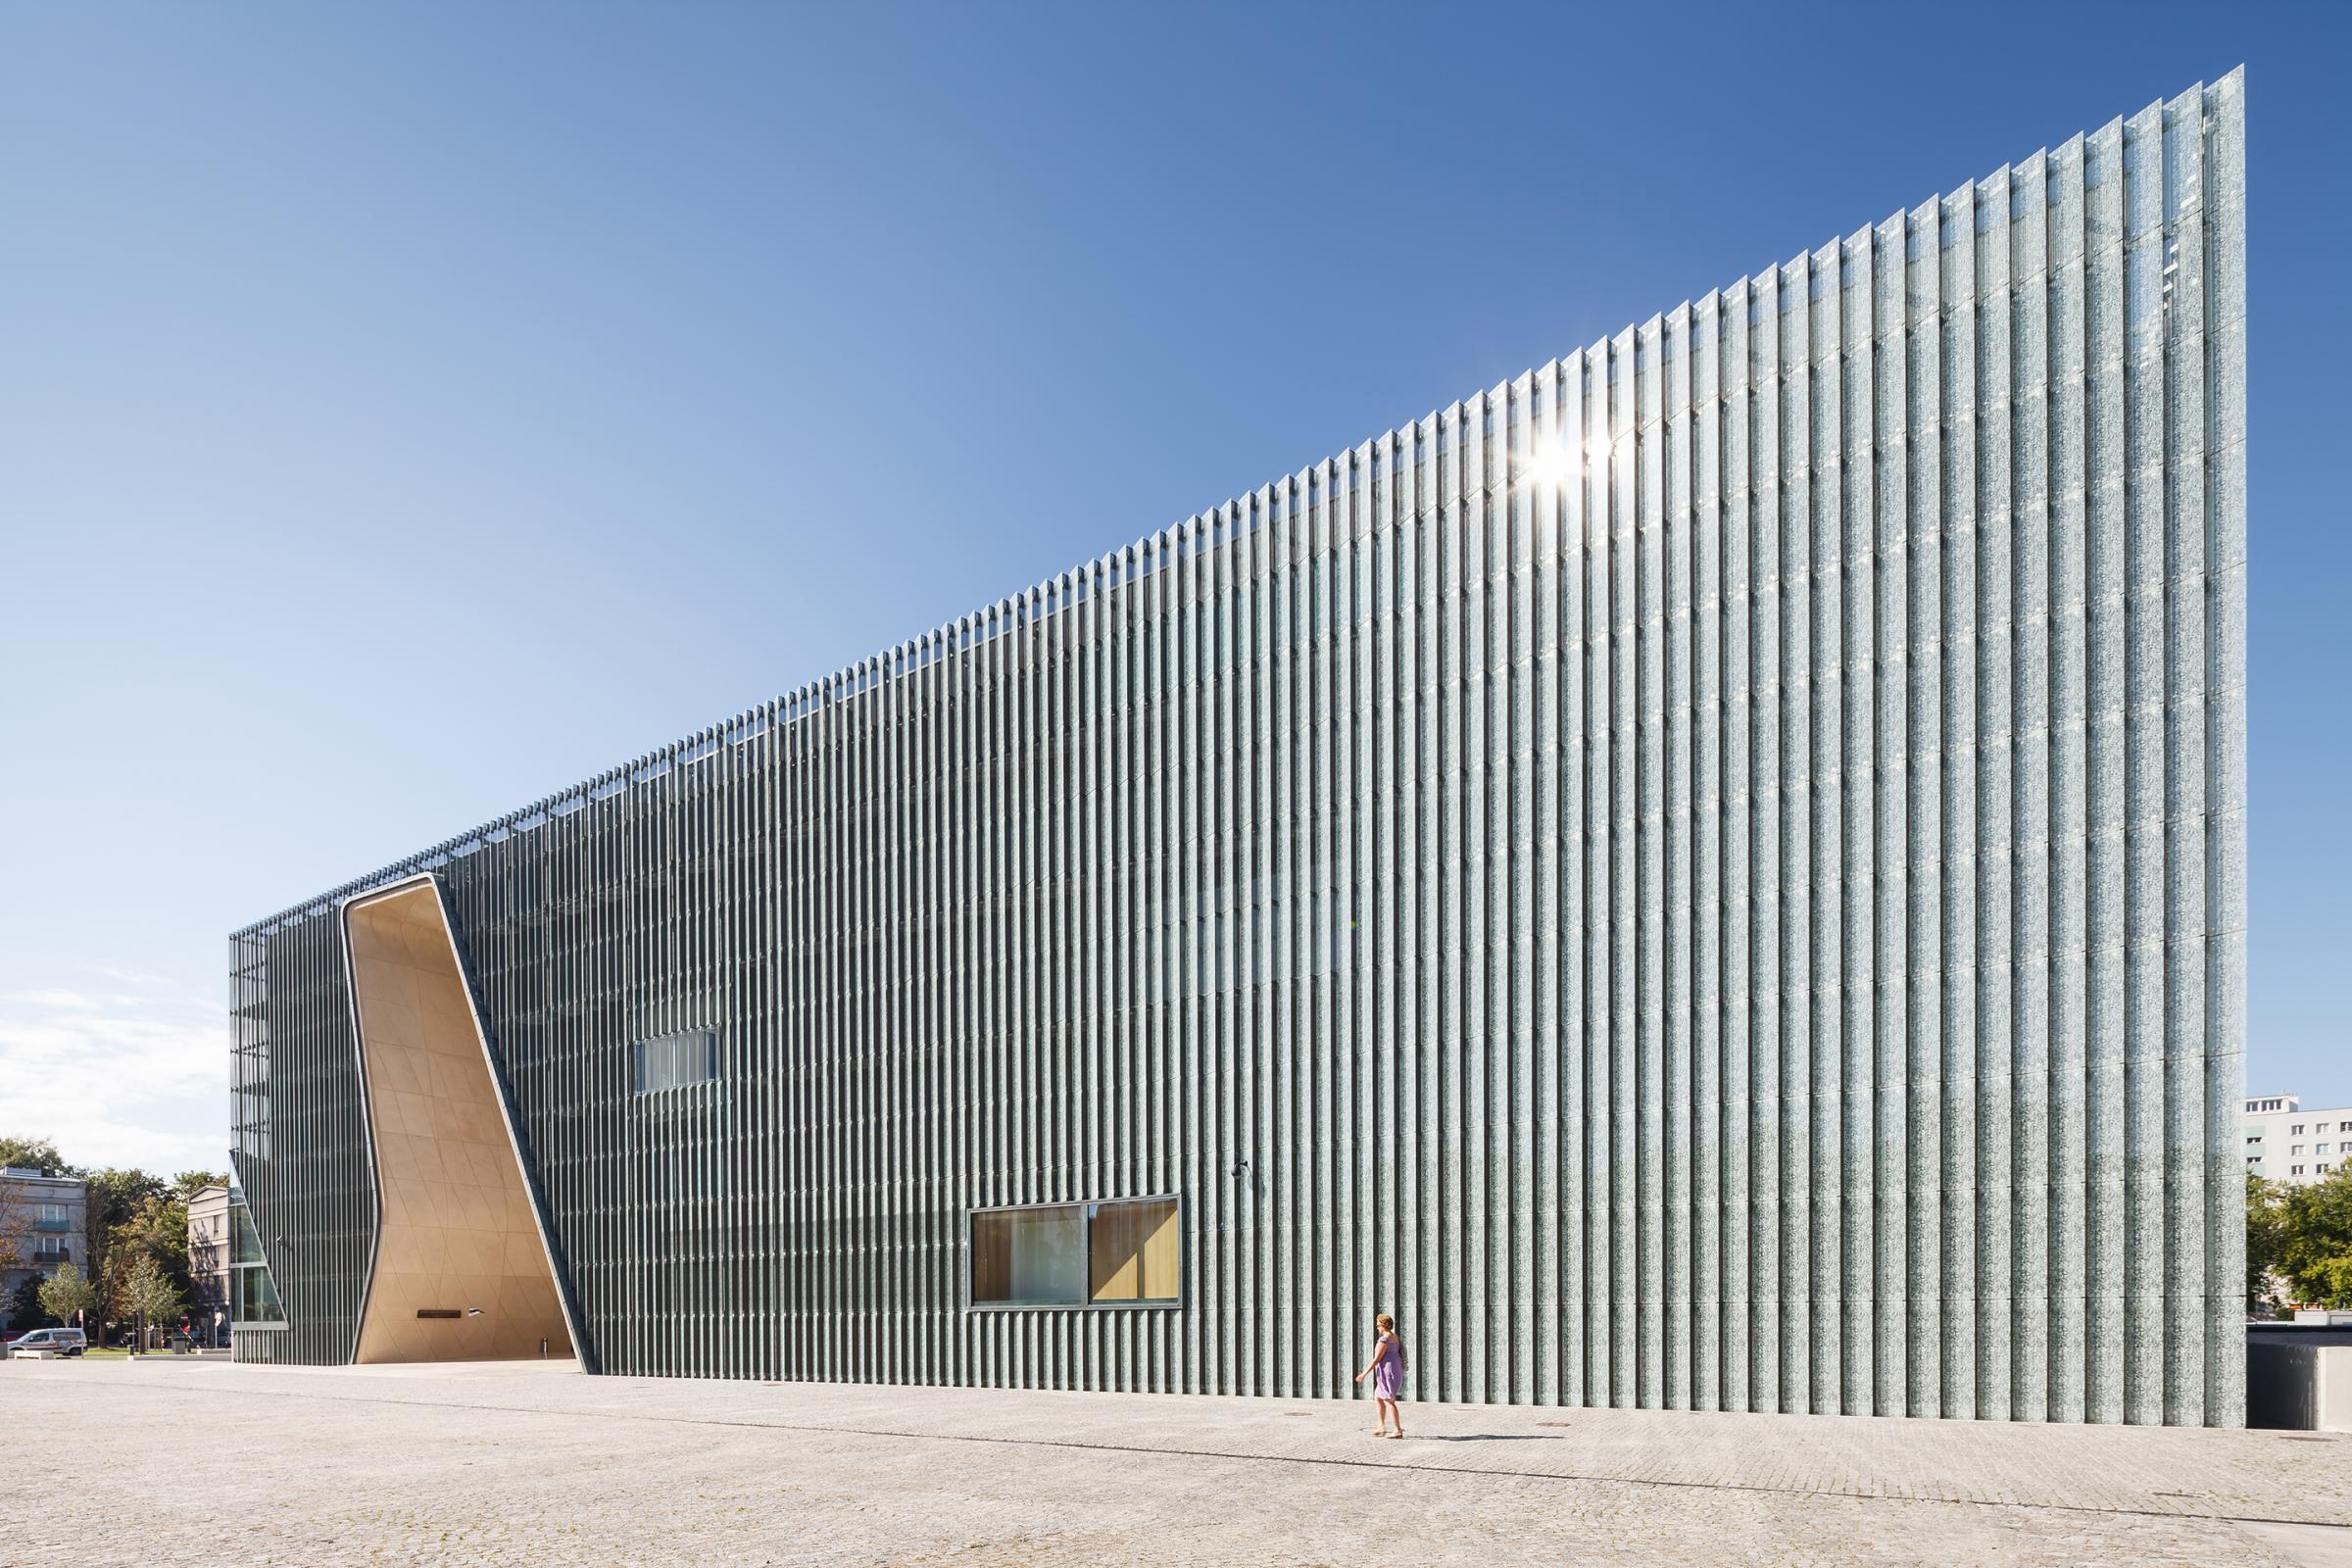 Photograph of POLIN Museum of the History of Polish Jews, designed by Lahdelma & Mahlamäki Architects and located in Warsaw, Poland